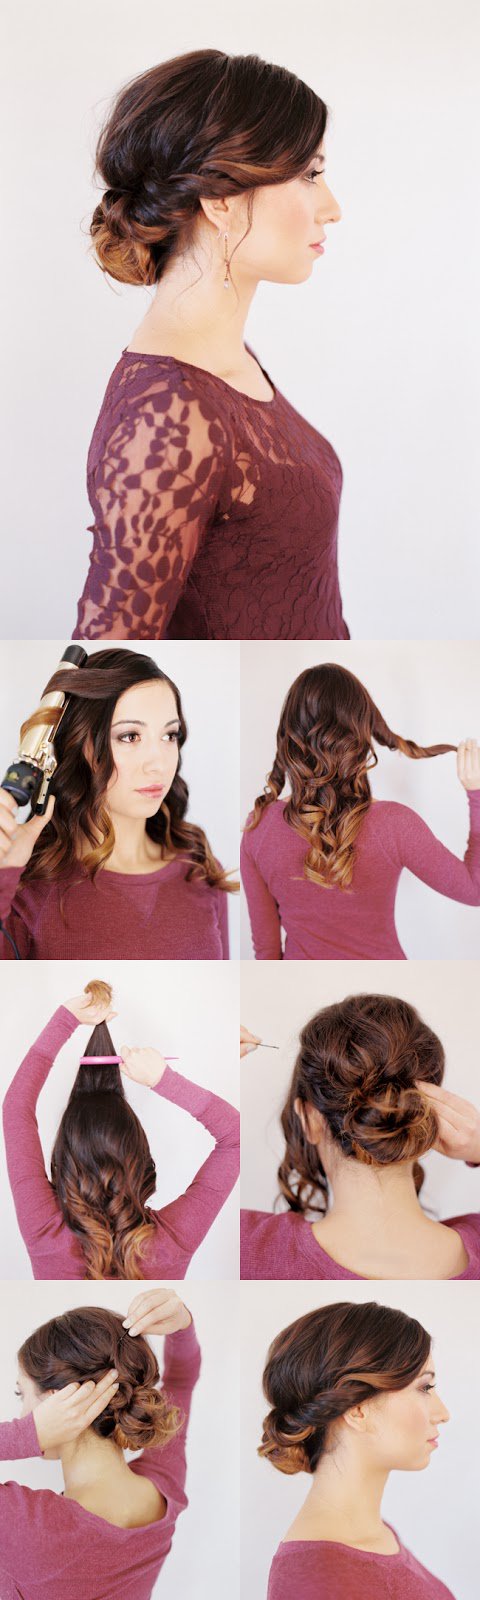 16 Stunning Hairstyles with Step-by-Step Tutorials ...